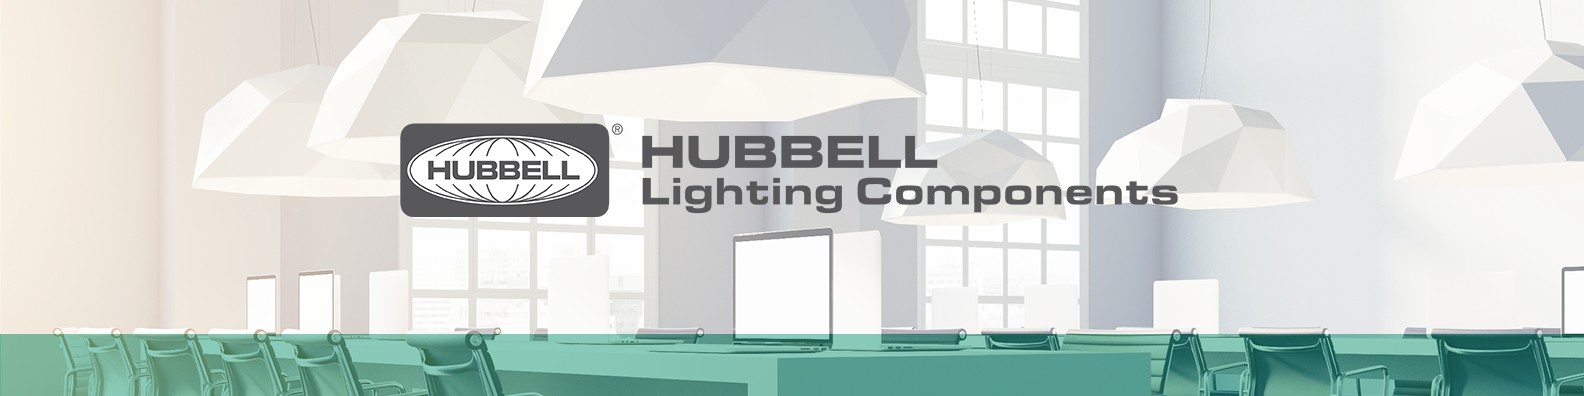 Hubbell Lighting Components Linkedin